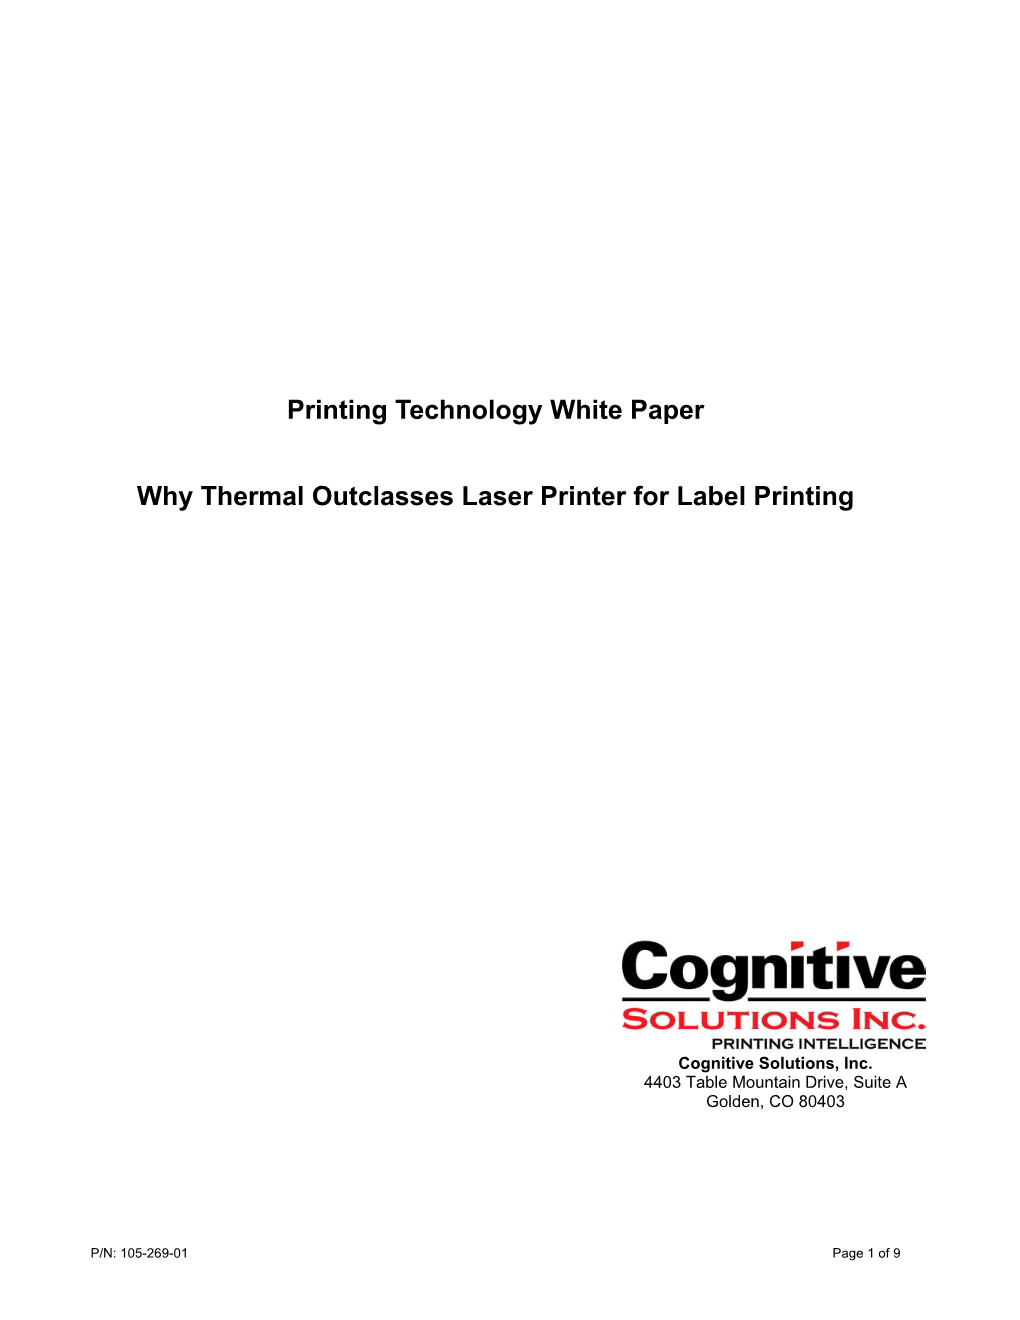 Printing Technology White Paper Why Thermal Outclasses Laser Printer